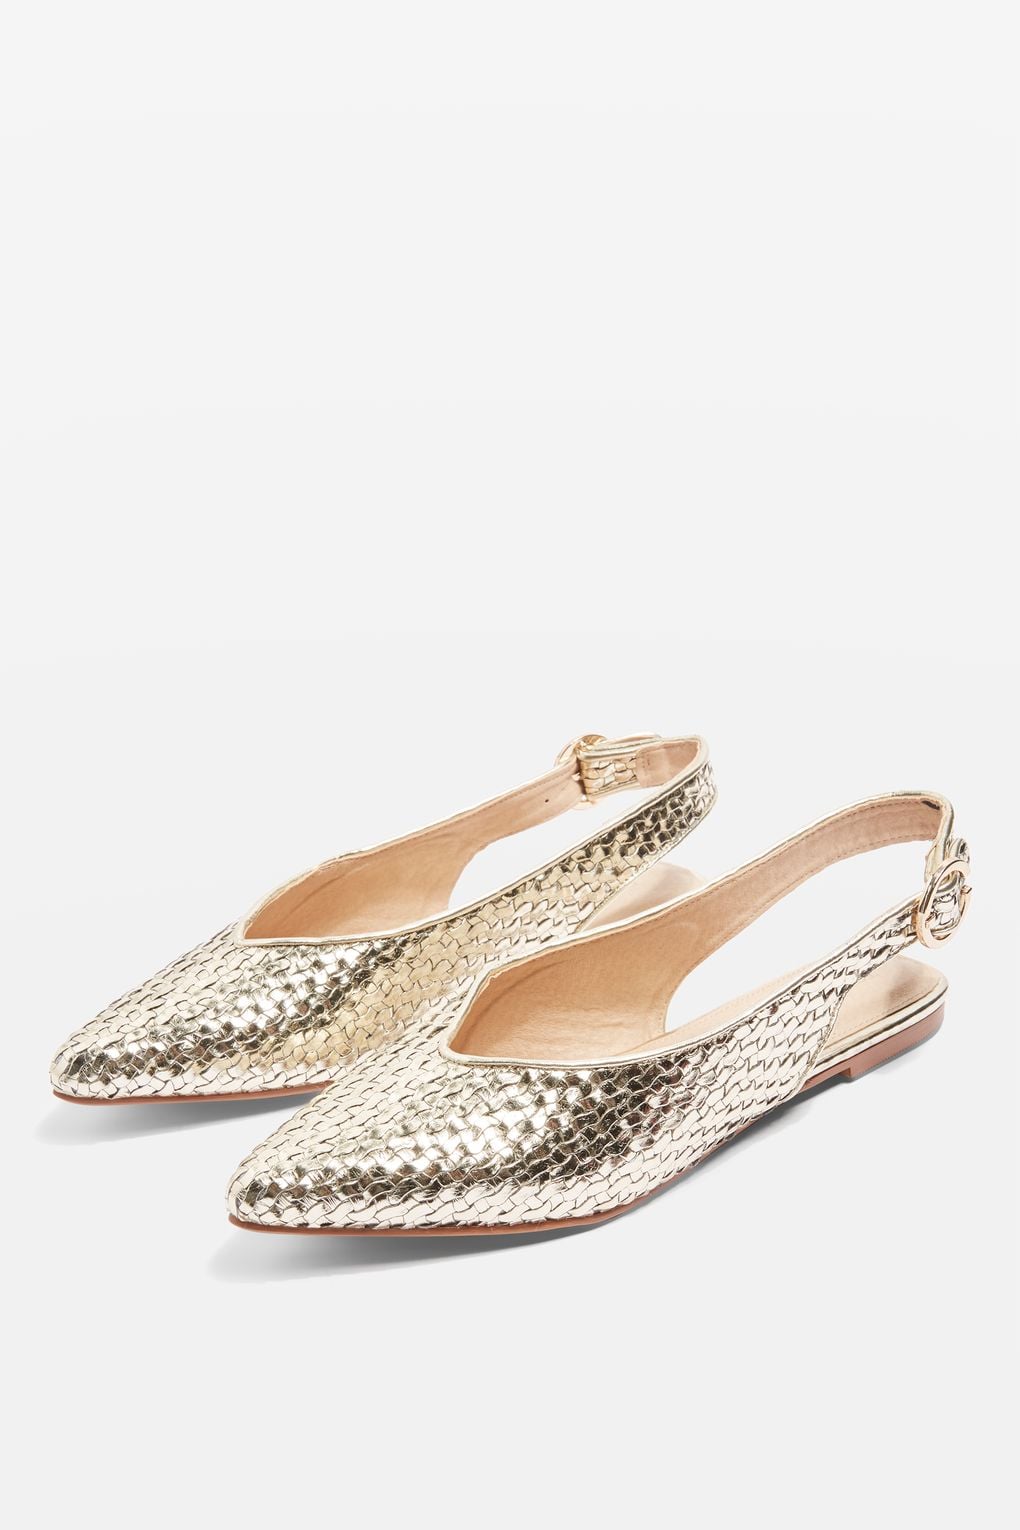 topshop pointed flats